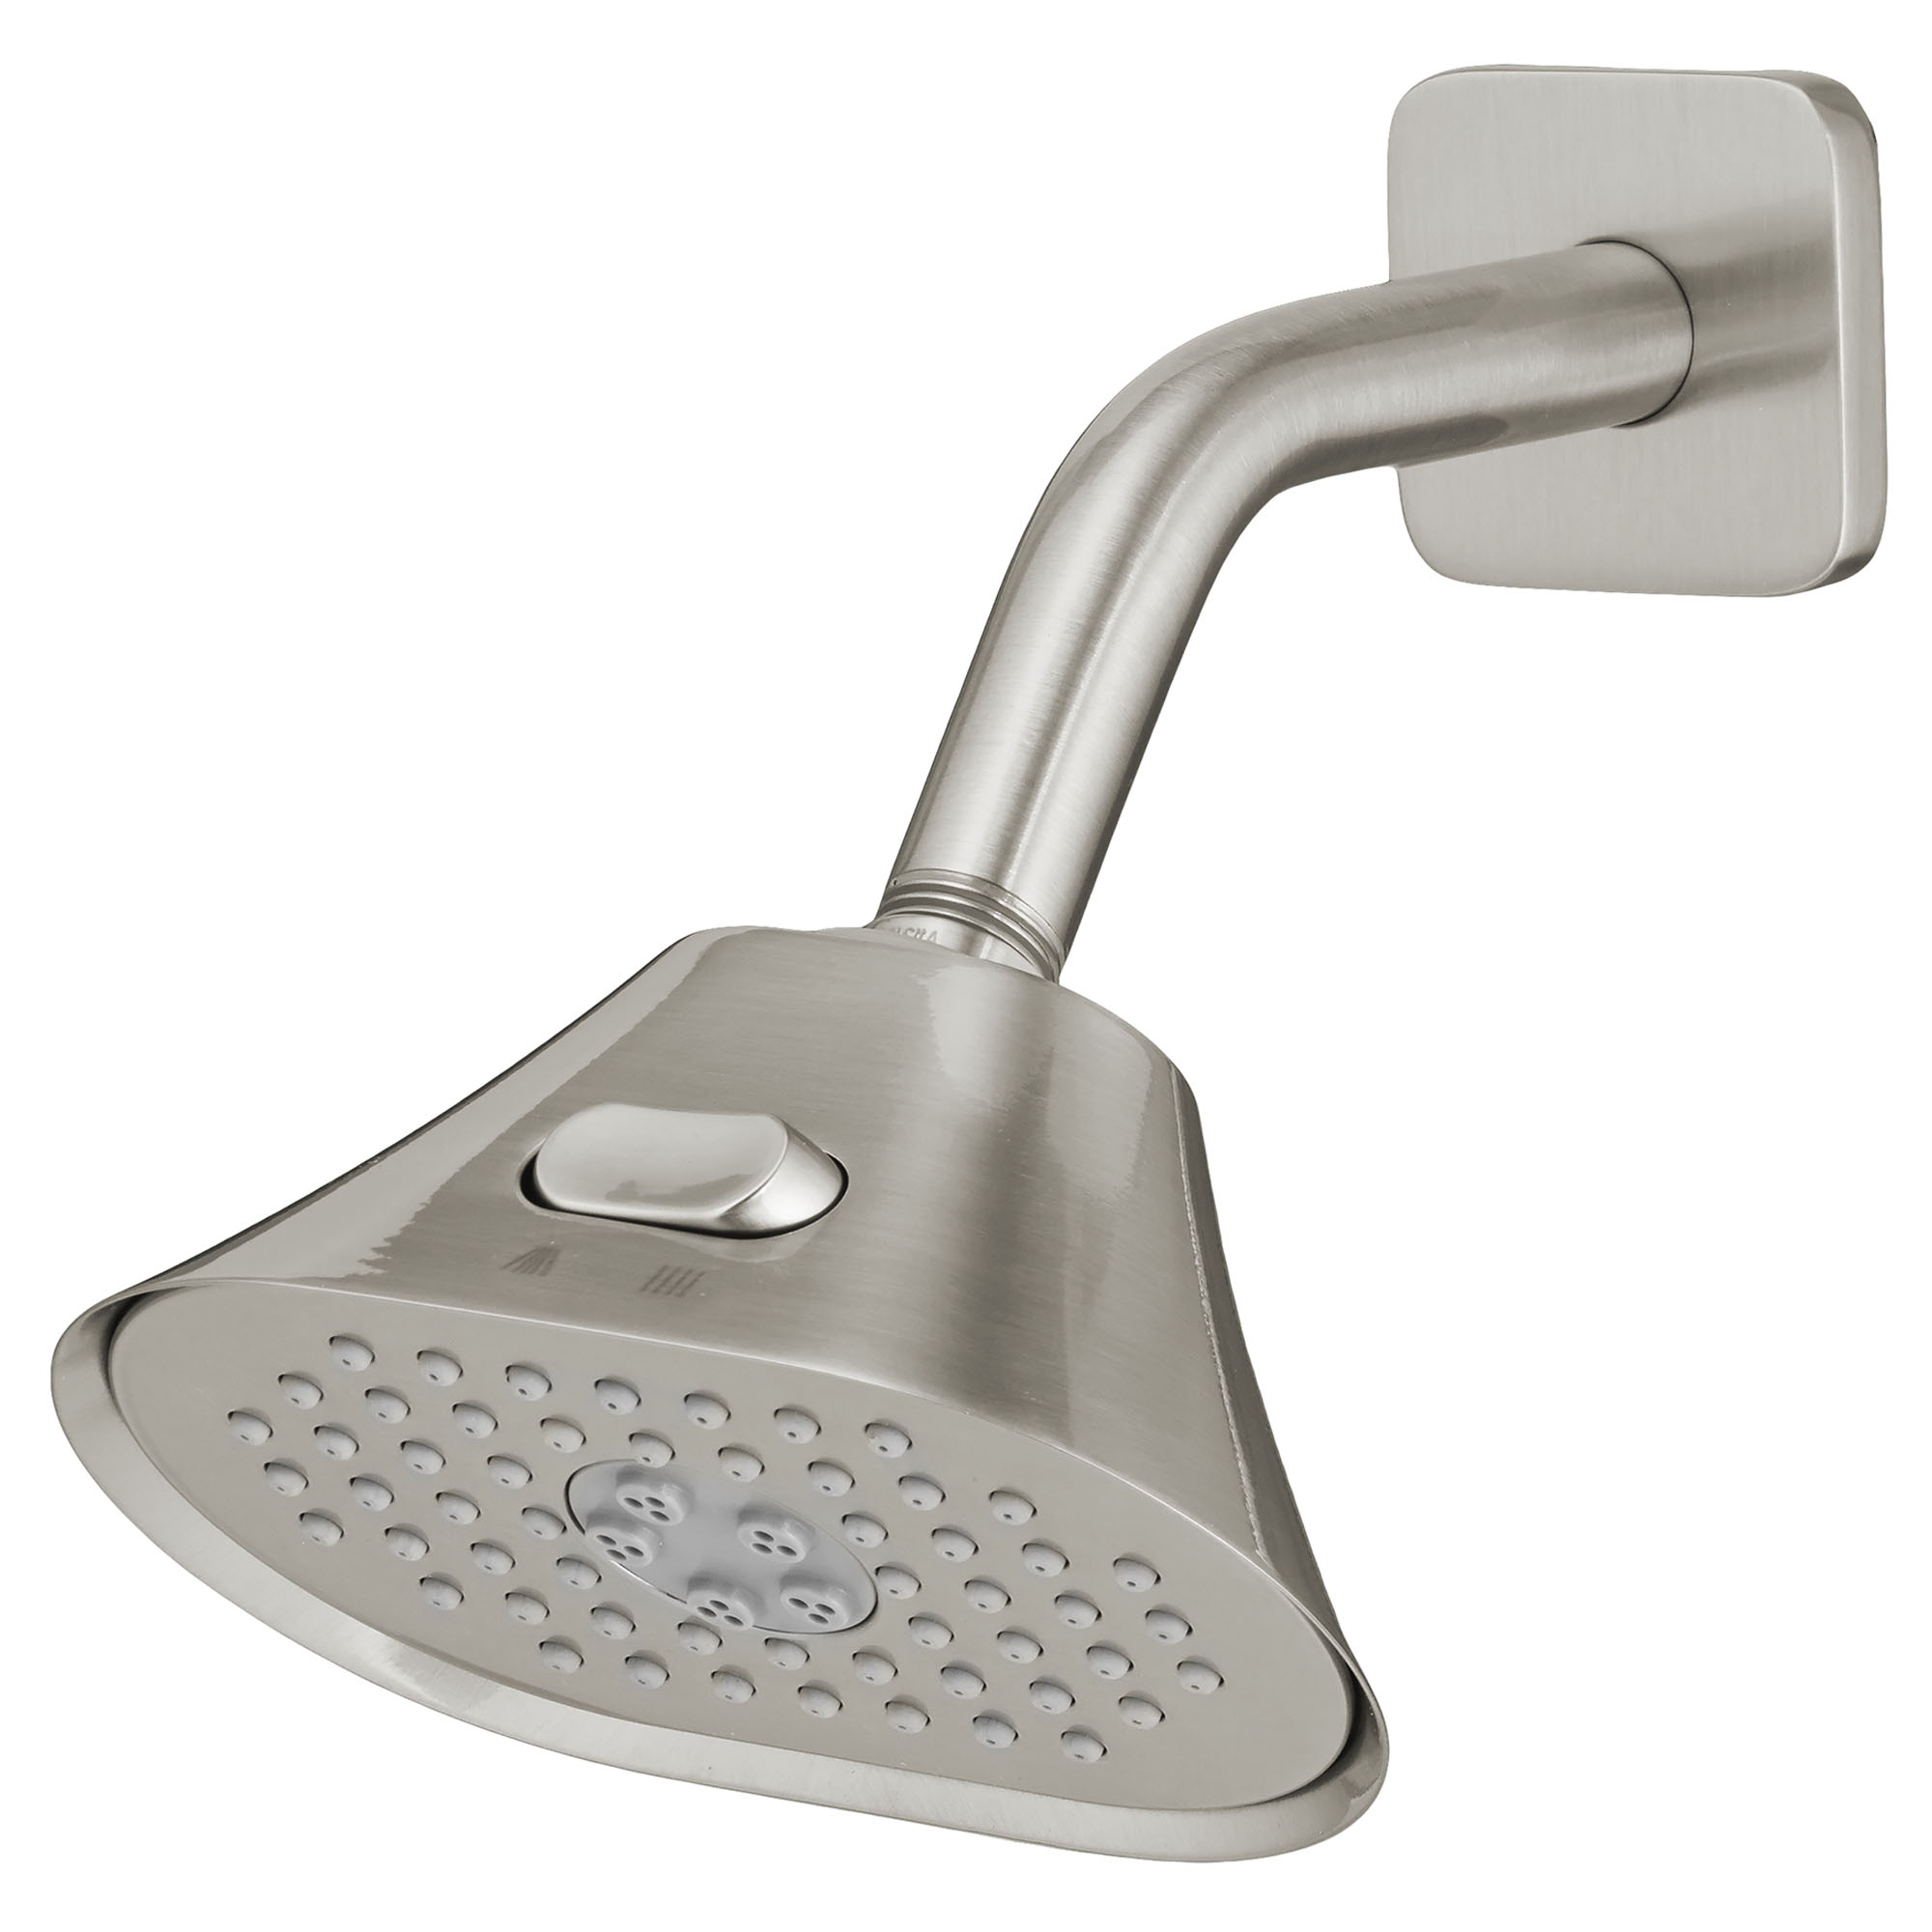 Equility Mulifunction Showerhead